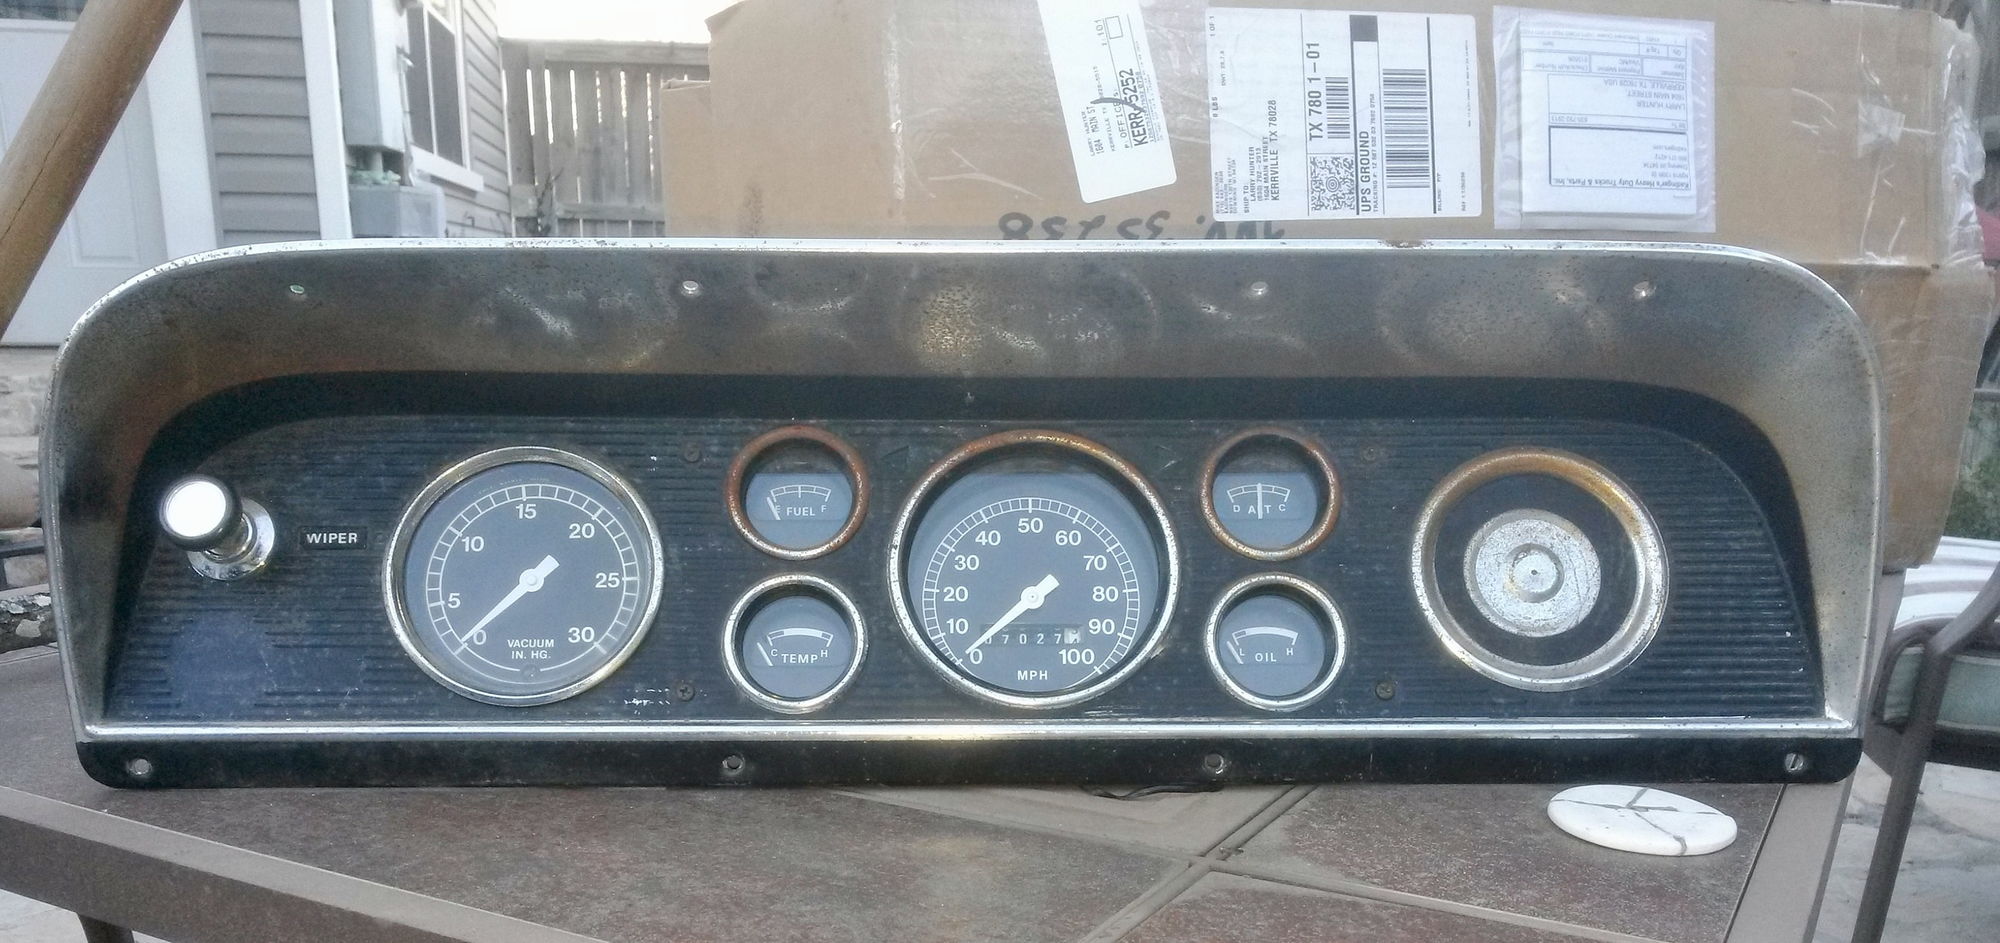 1969 Ford truck instrument cluster